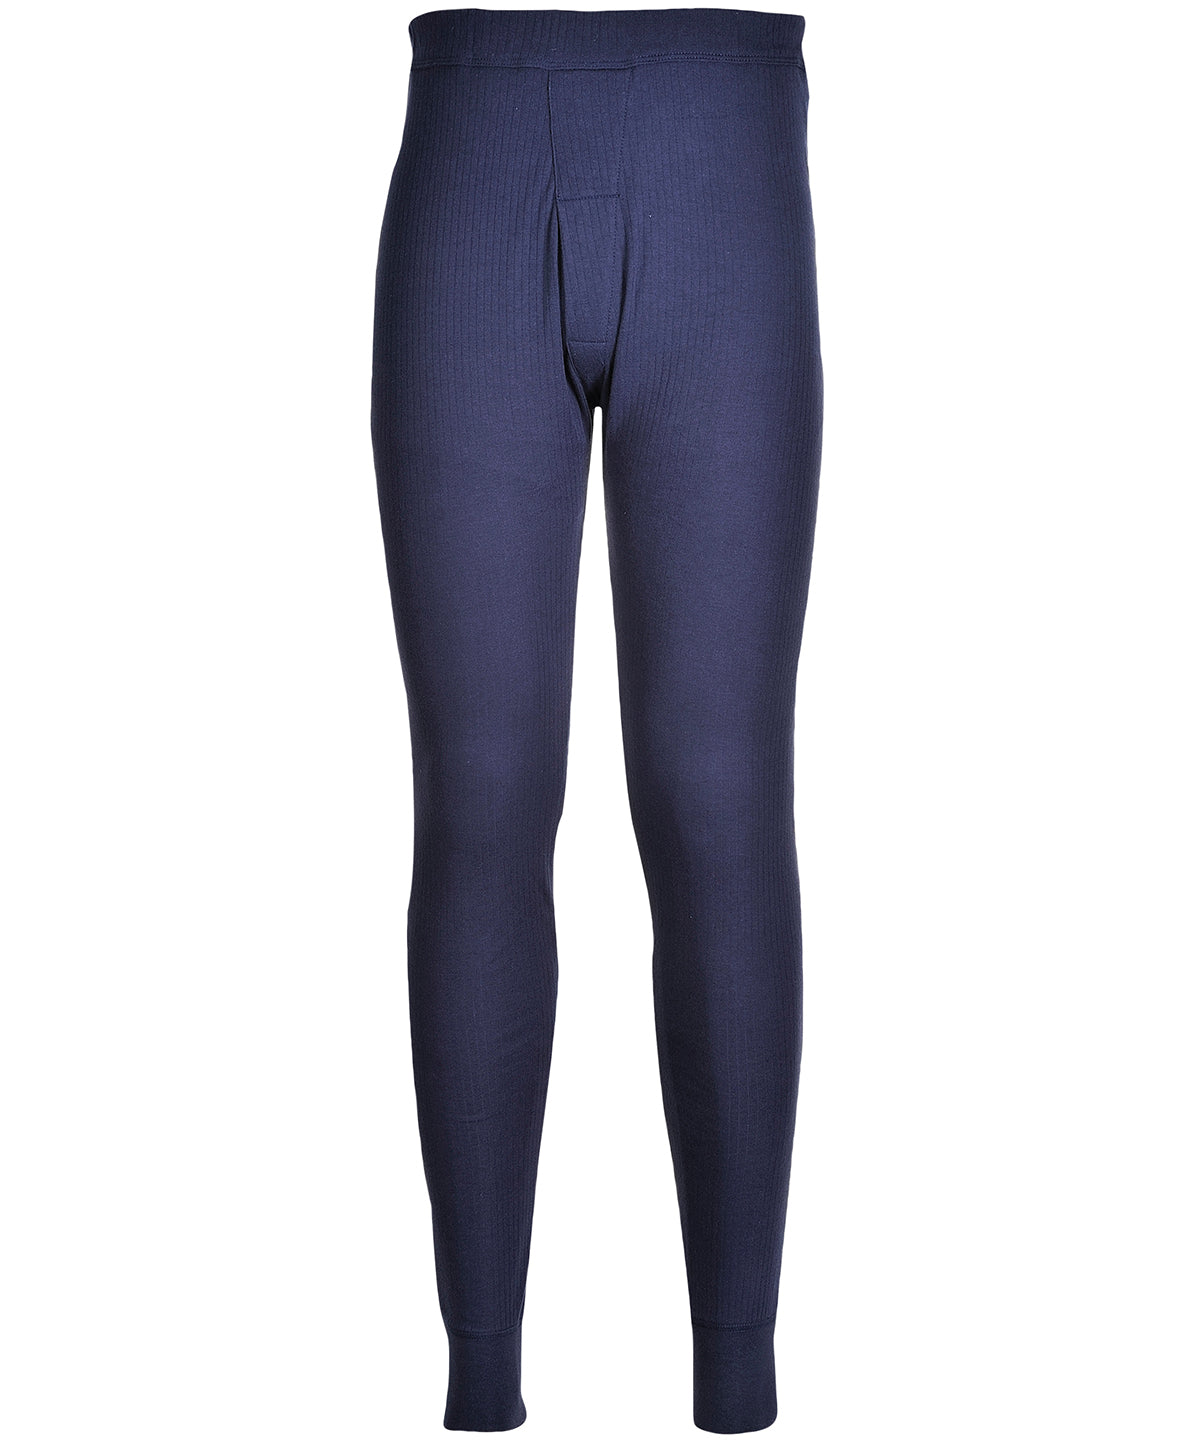 Thermal Trousers (B121)